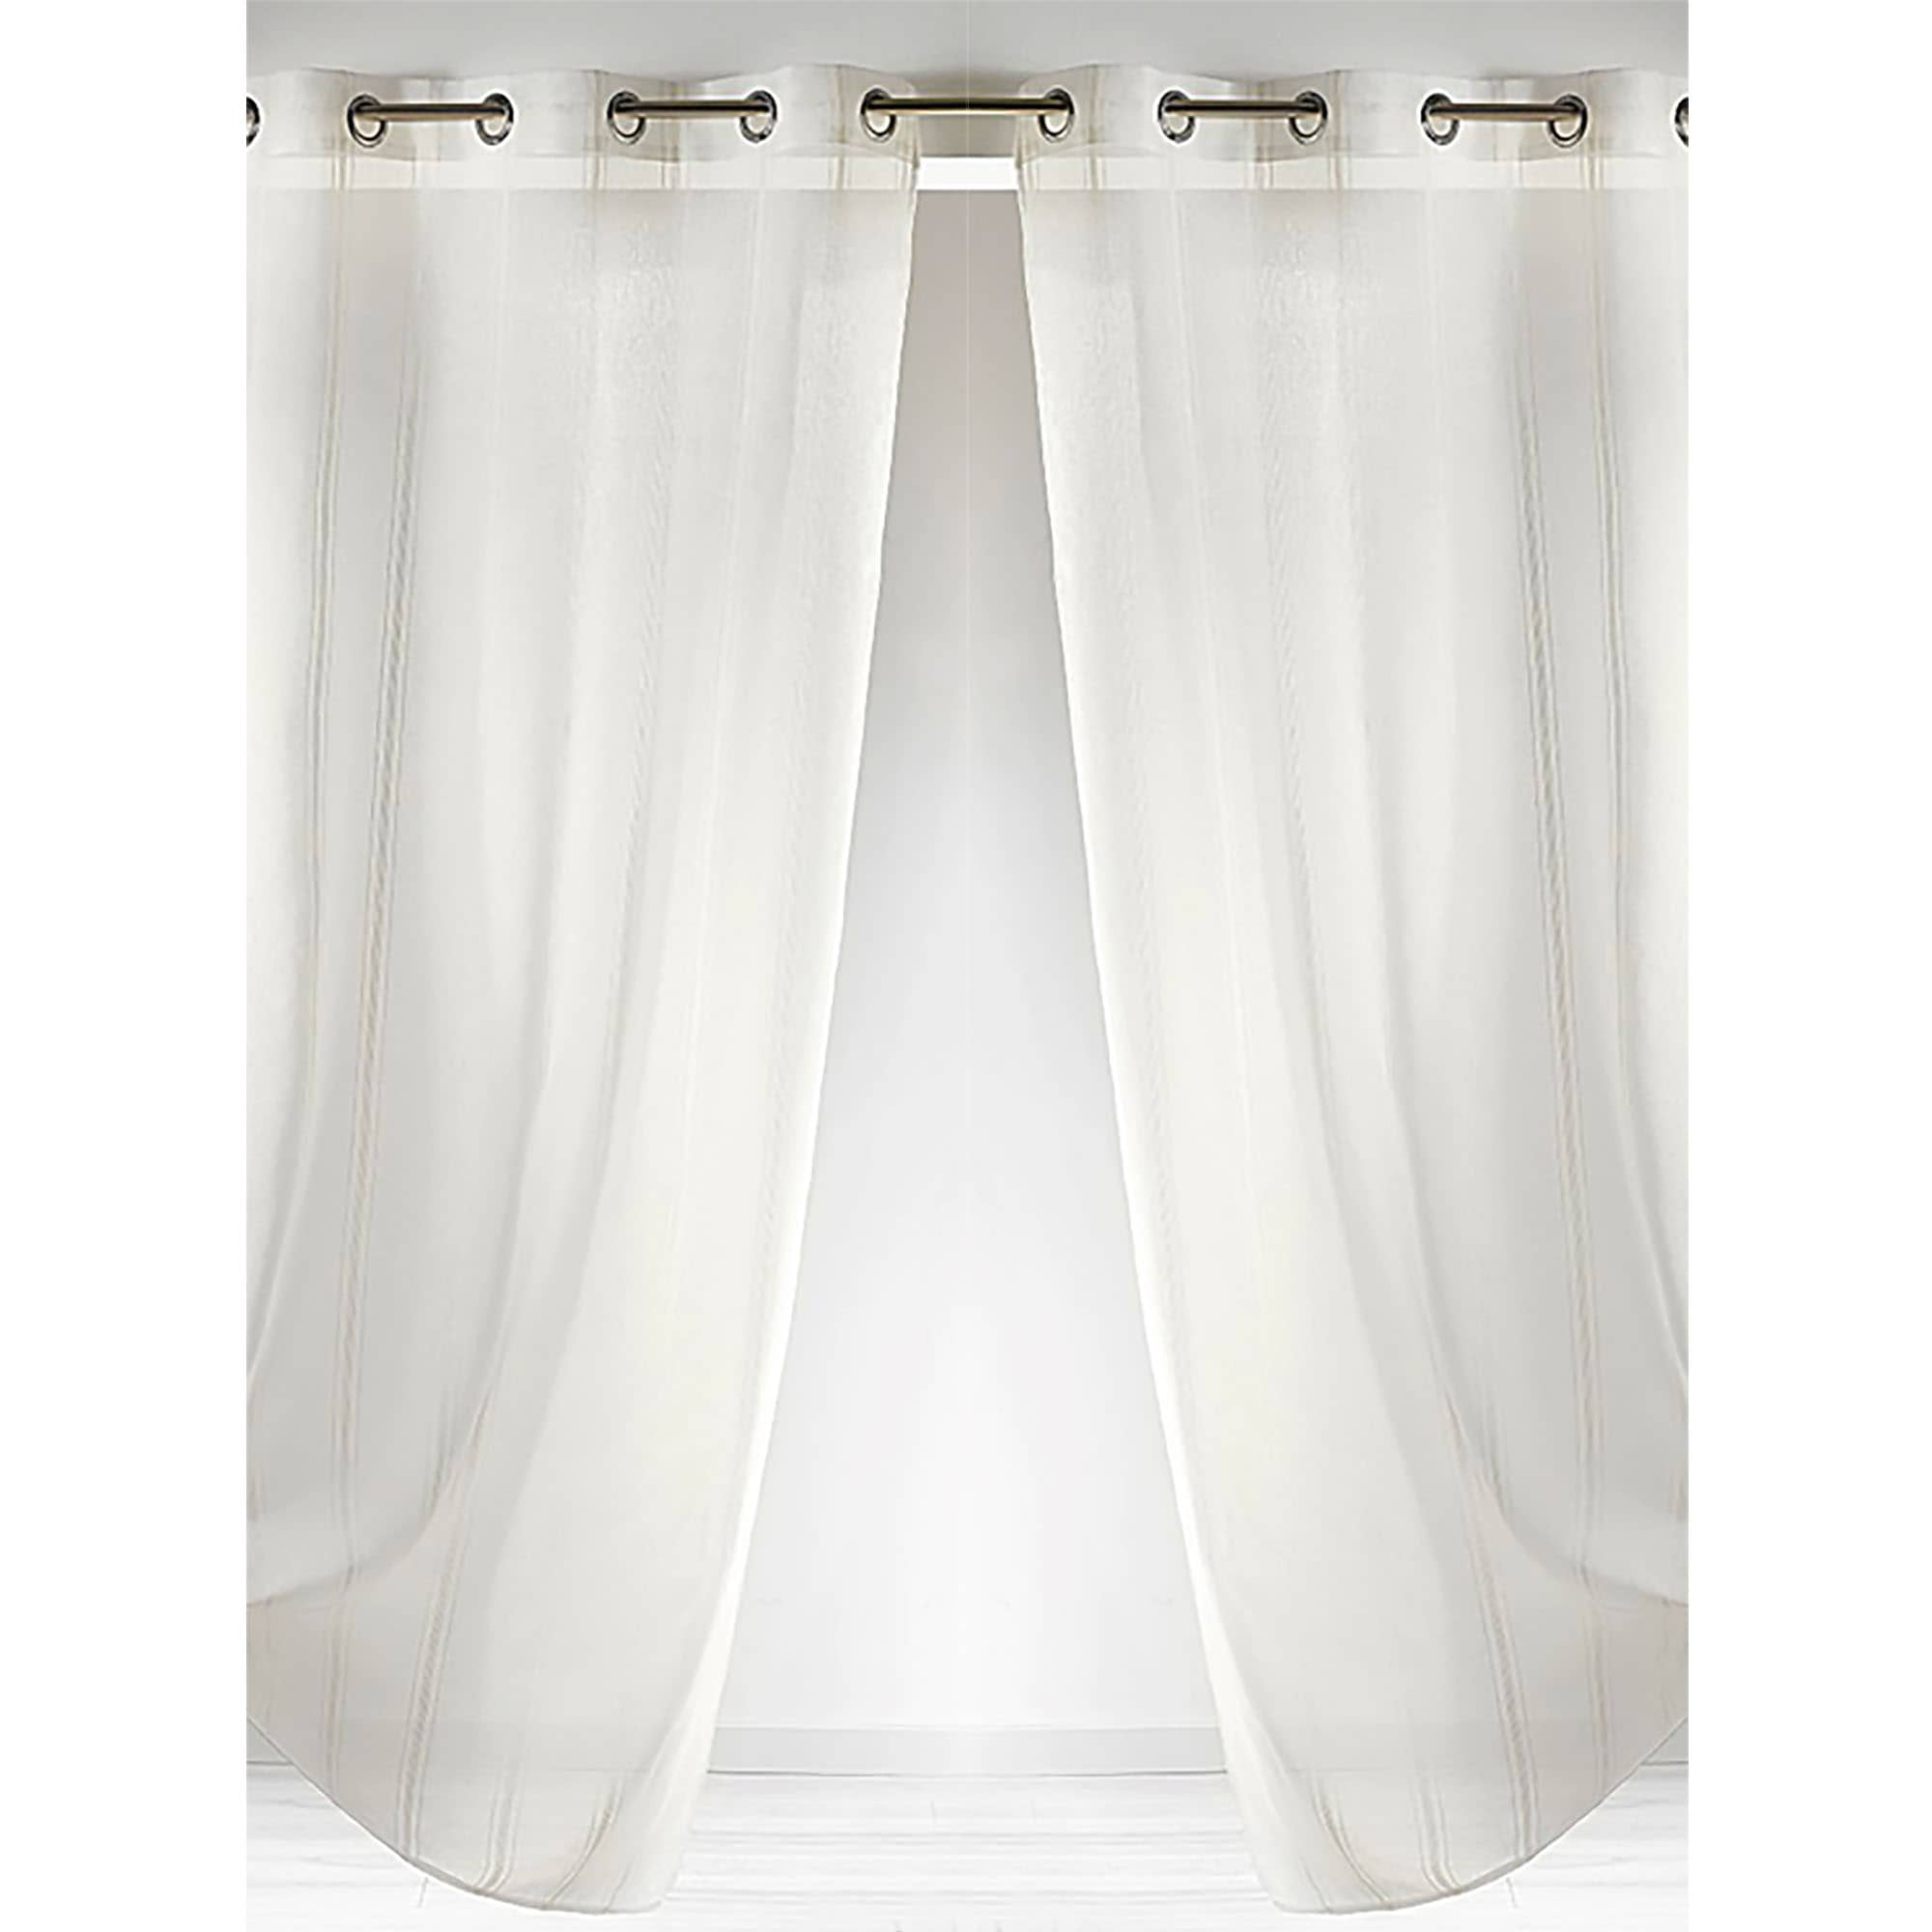 2 -piece natural white with subtle stripes details sheer curtain panels for large window